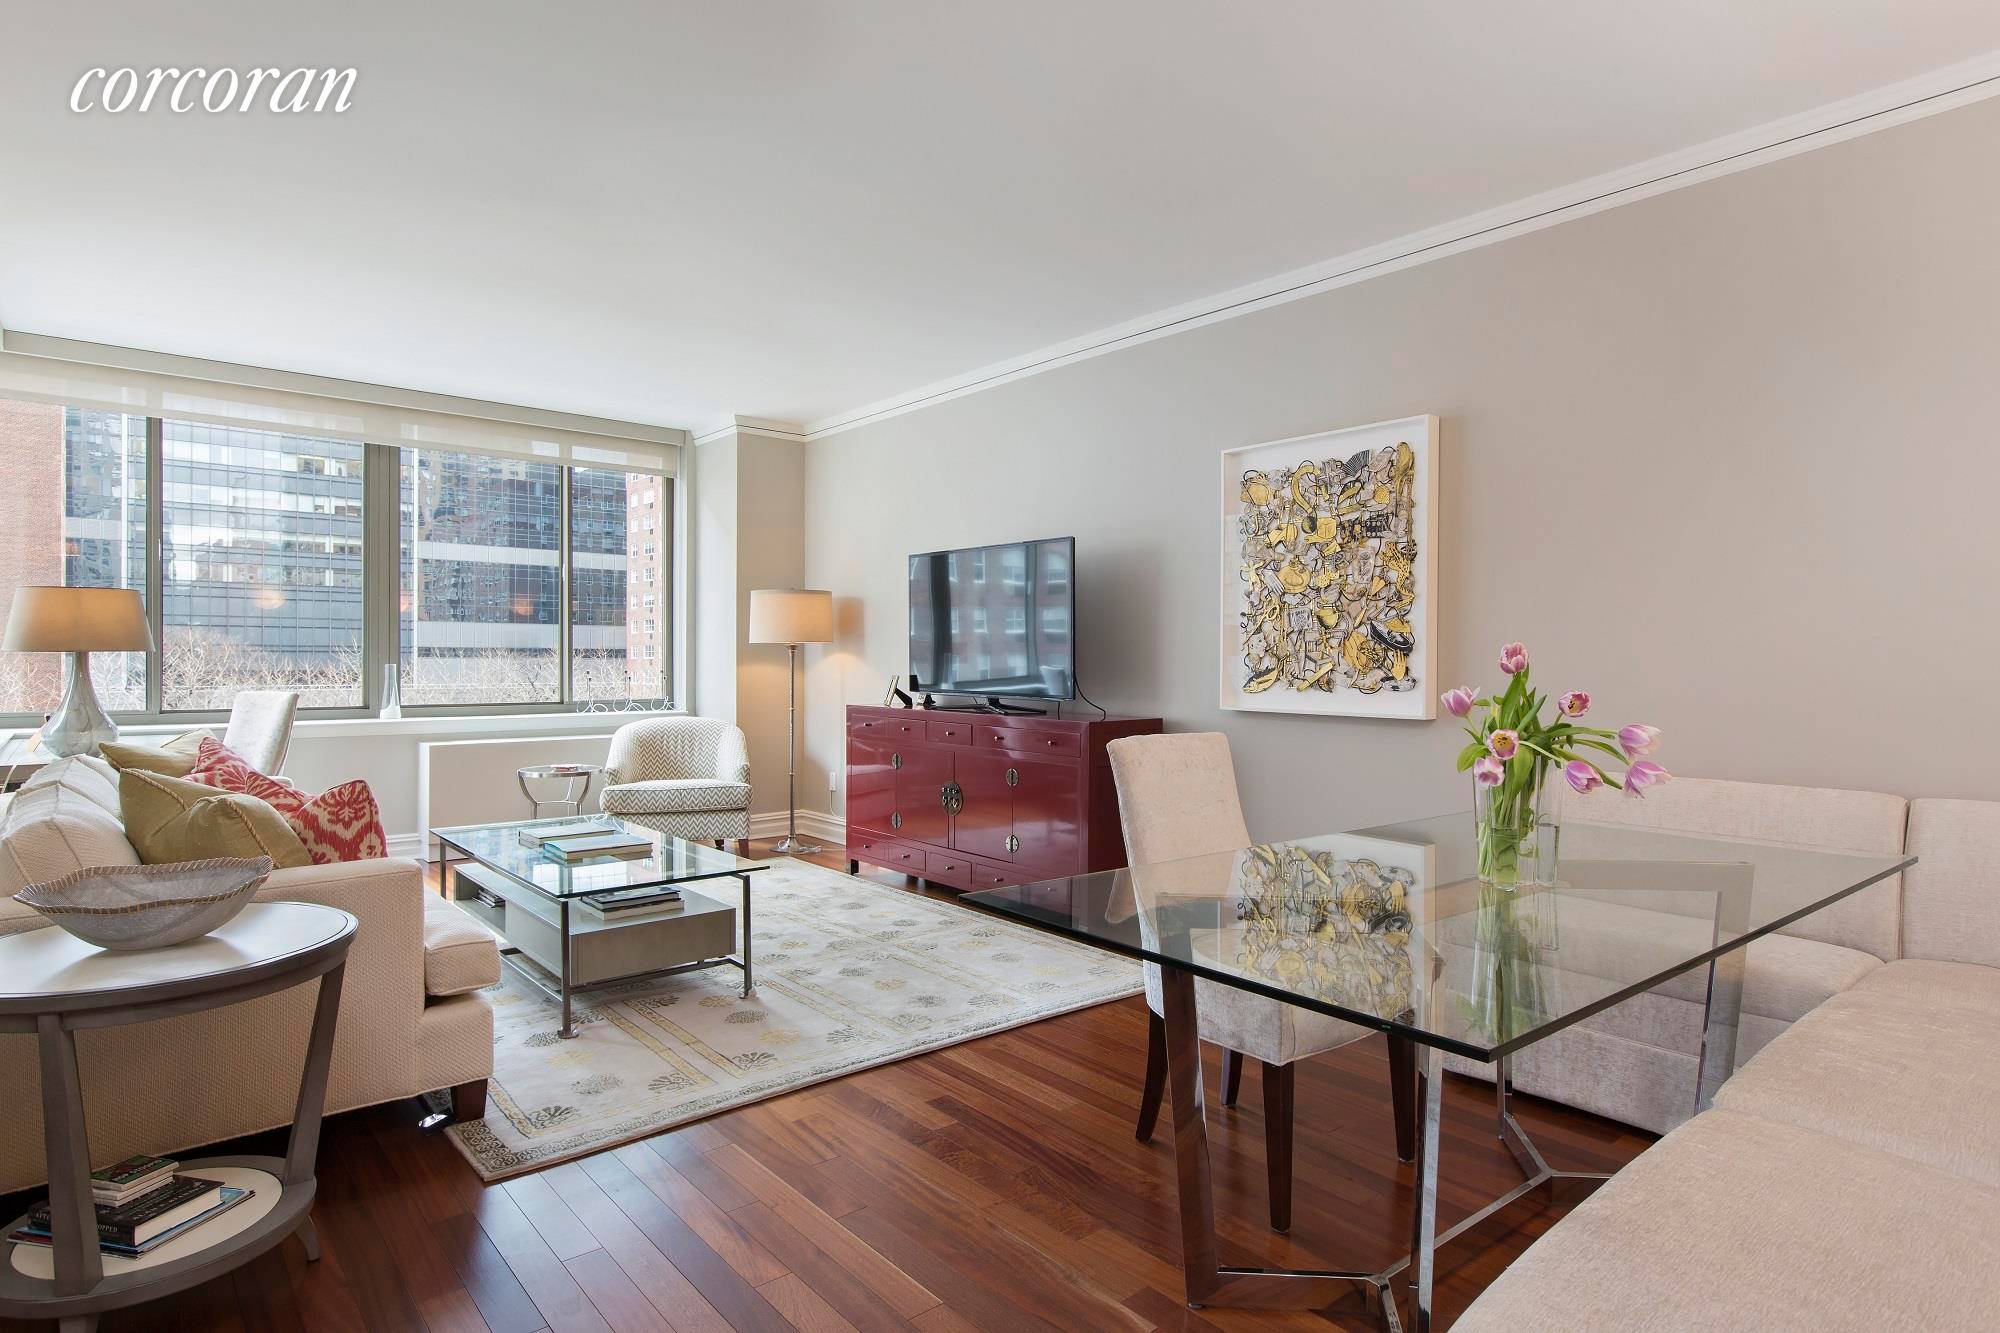 Elegance abounds in this Mint 2 Bed 2.